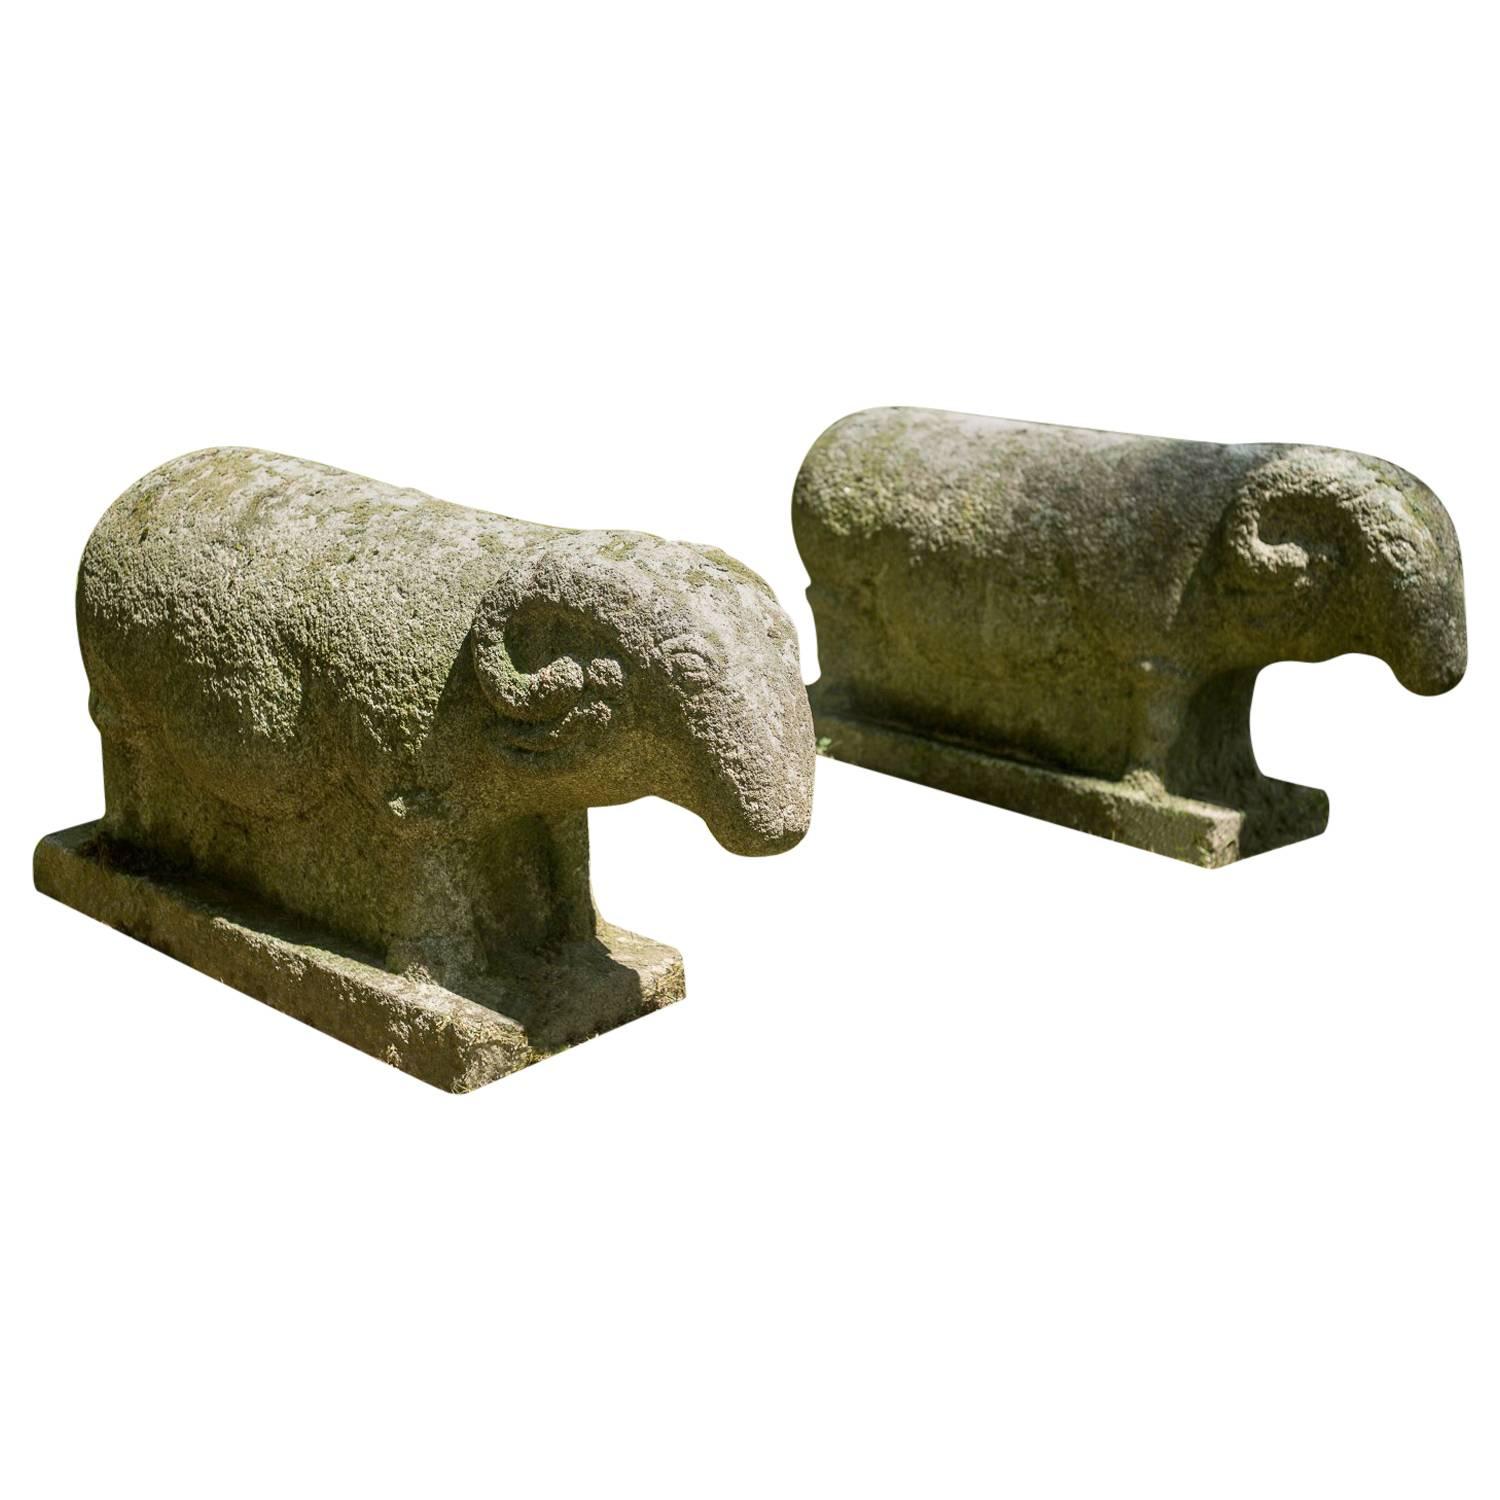 Pair of Early 16th Century Granite Ram Garden Sculptures For Sale